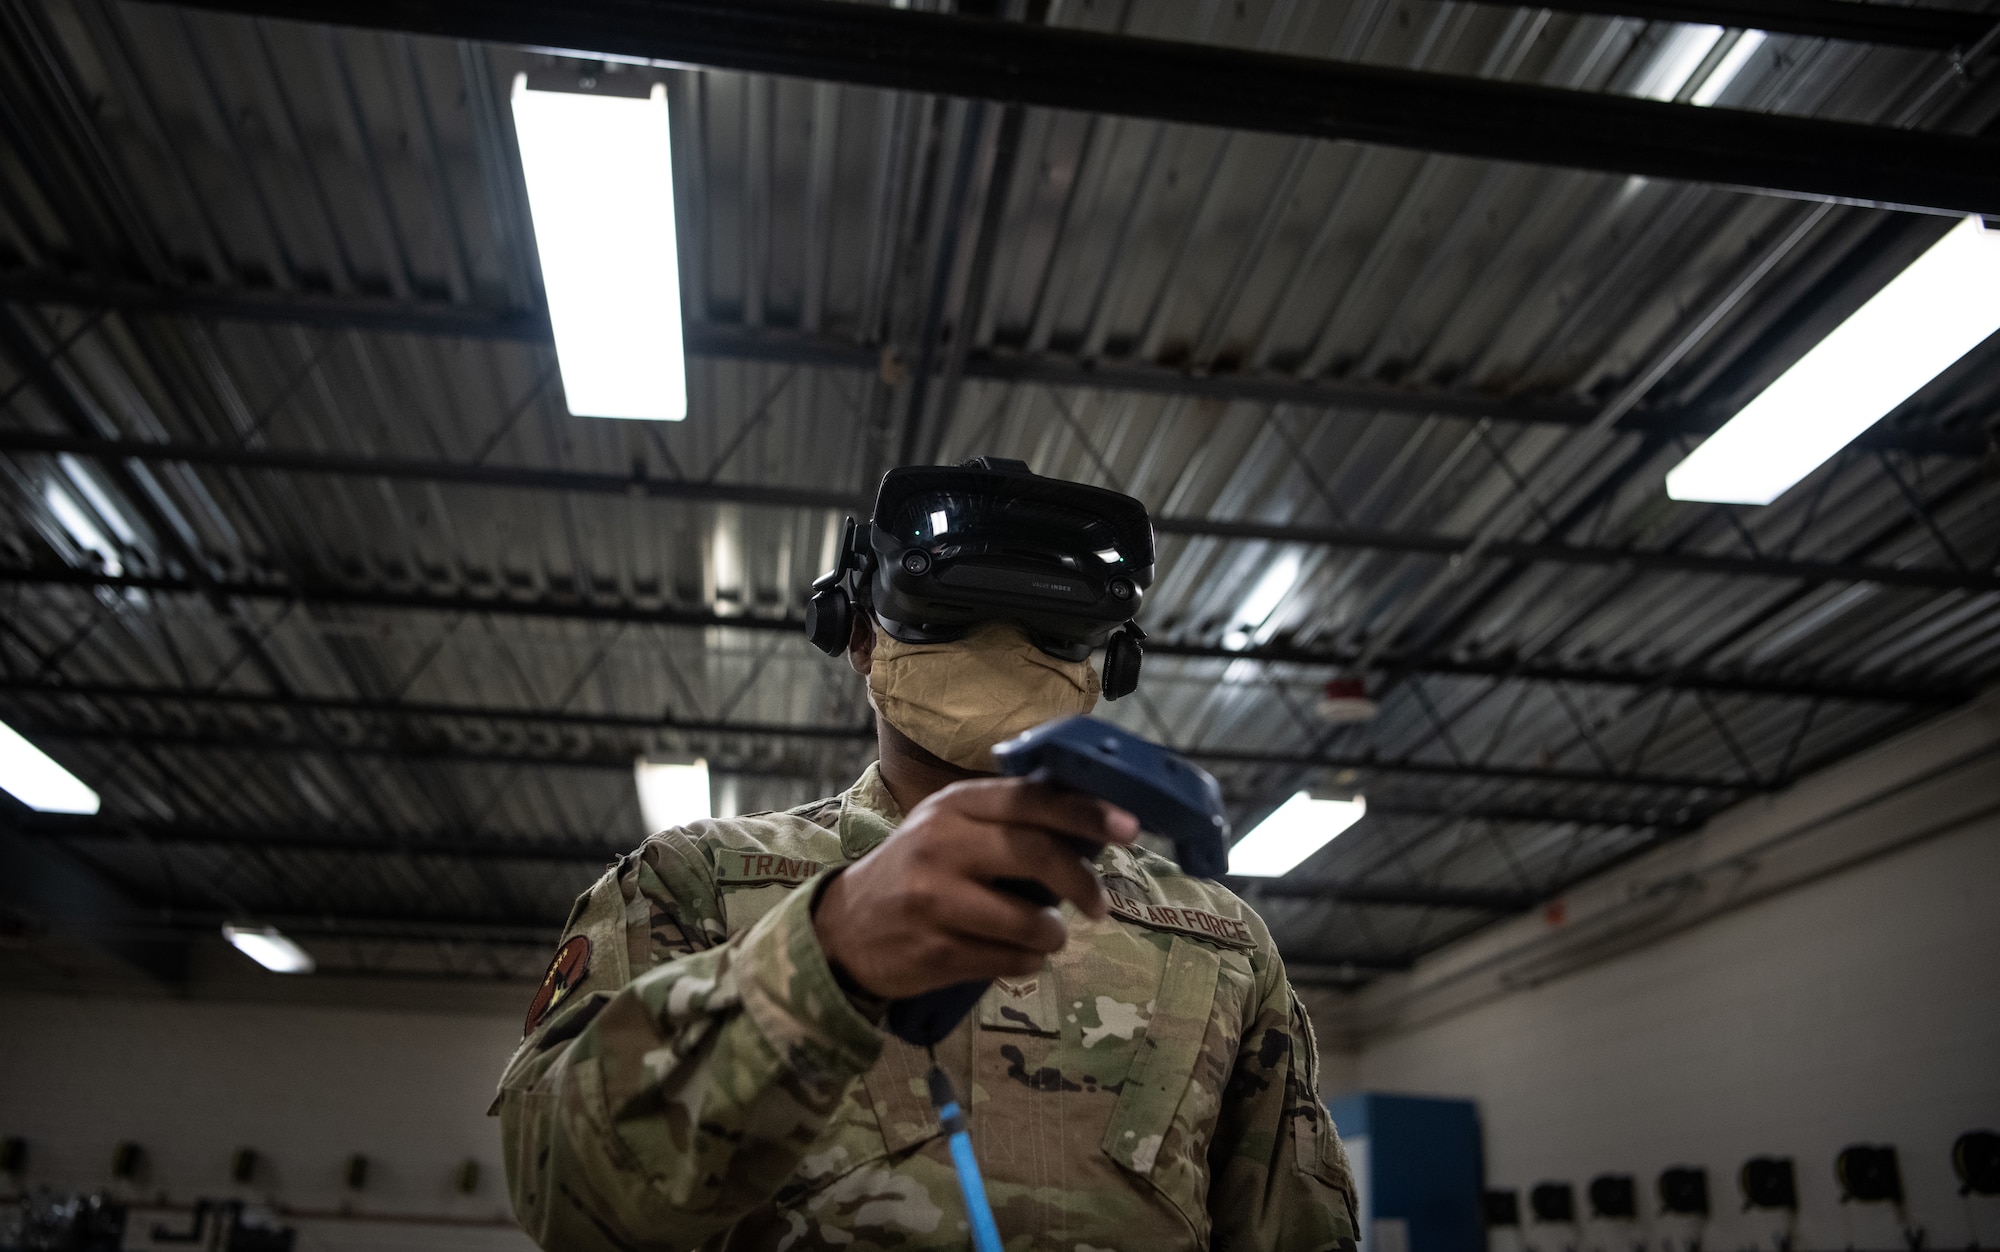 Airman 1st Class Delwyn Travillion, 56th Component Maintenance Squadron aircrew egress systems apprentice, trains on a virtual reality maintenance trainer July 13, 2020, at Luke Air Force Base, Ariz. The Egress Systems Flight implemented the virtual reality maintenance trainer to enhance training efficiency and reduce training time. The 56th Fighter Wing’s mission is to train the world’s greatest fighter pilots and combat ready Airmen. (U.S. Air Force photo by Airman 1st Class Dominic Tyler)